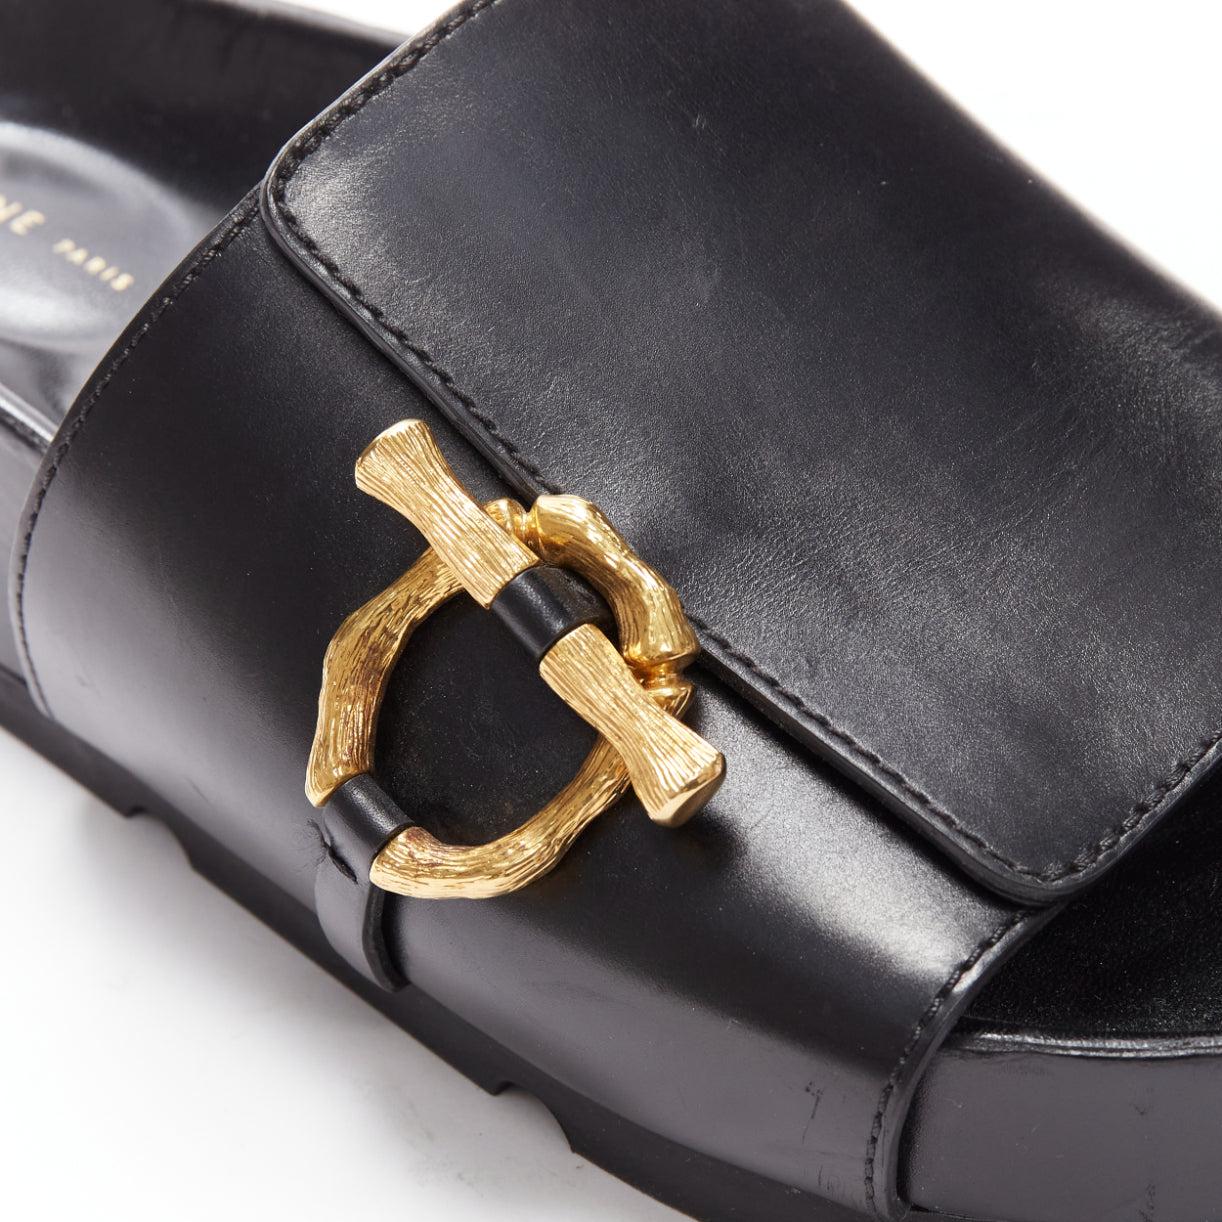 new OLD CELINE Phoebe Philo gold bamboo buckle black leather sandals EU38 3